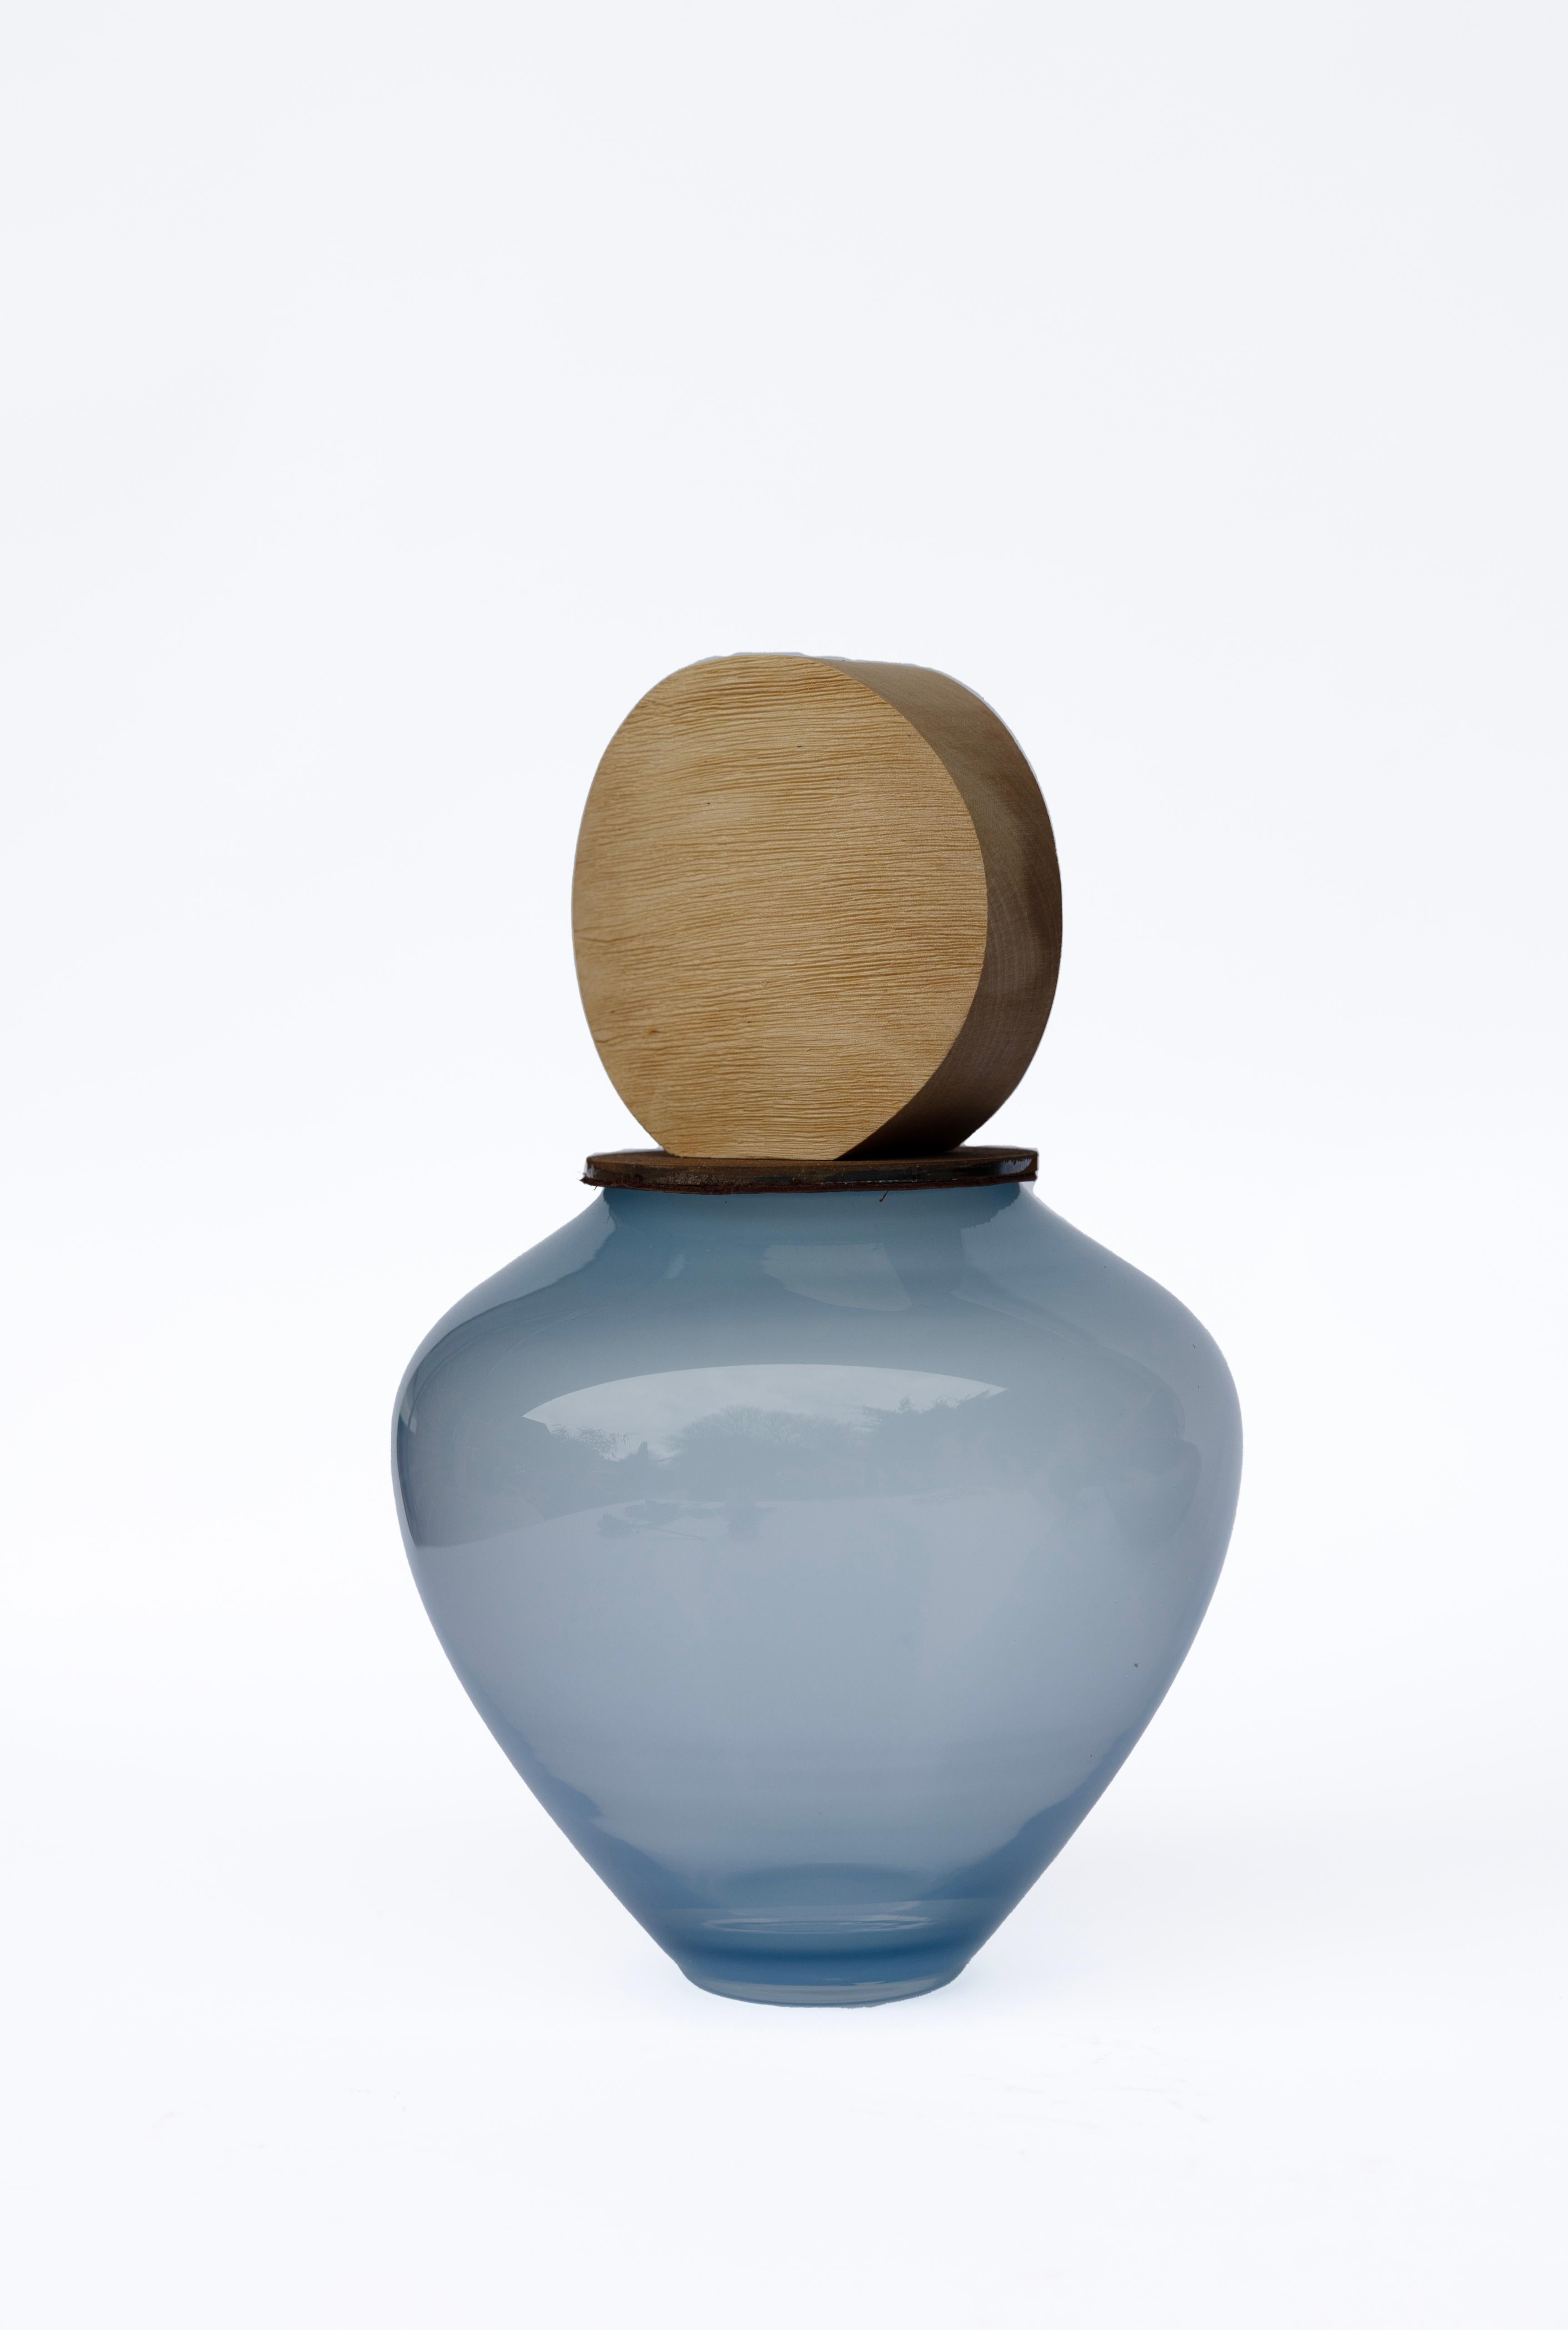 Ohana Stacking Pigeon Blue S & Square Vessel by Pia Wüstenberg
Unique Piece. Handmade In Europe.
Dimensions: Ø 19 x H 25 cm.
Materials: Handblown glass, ceramic and wood.

Available in different color options. Dimensions are approximate, due to the